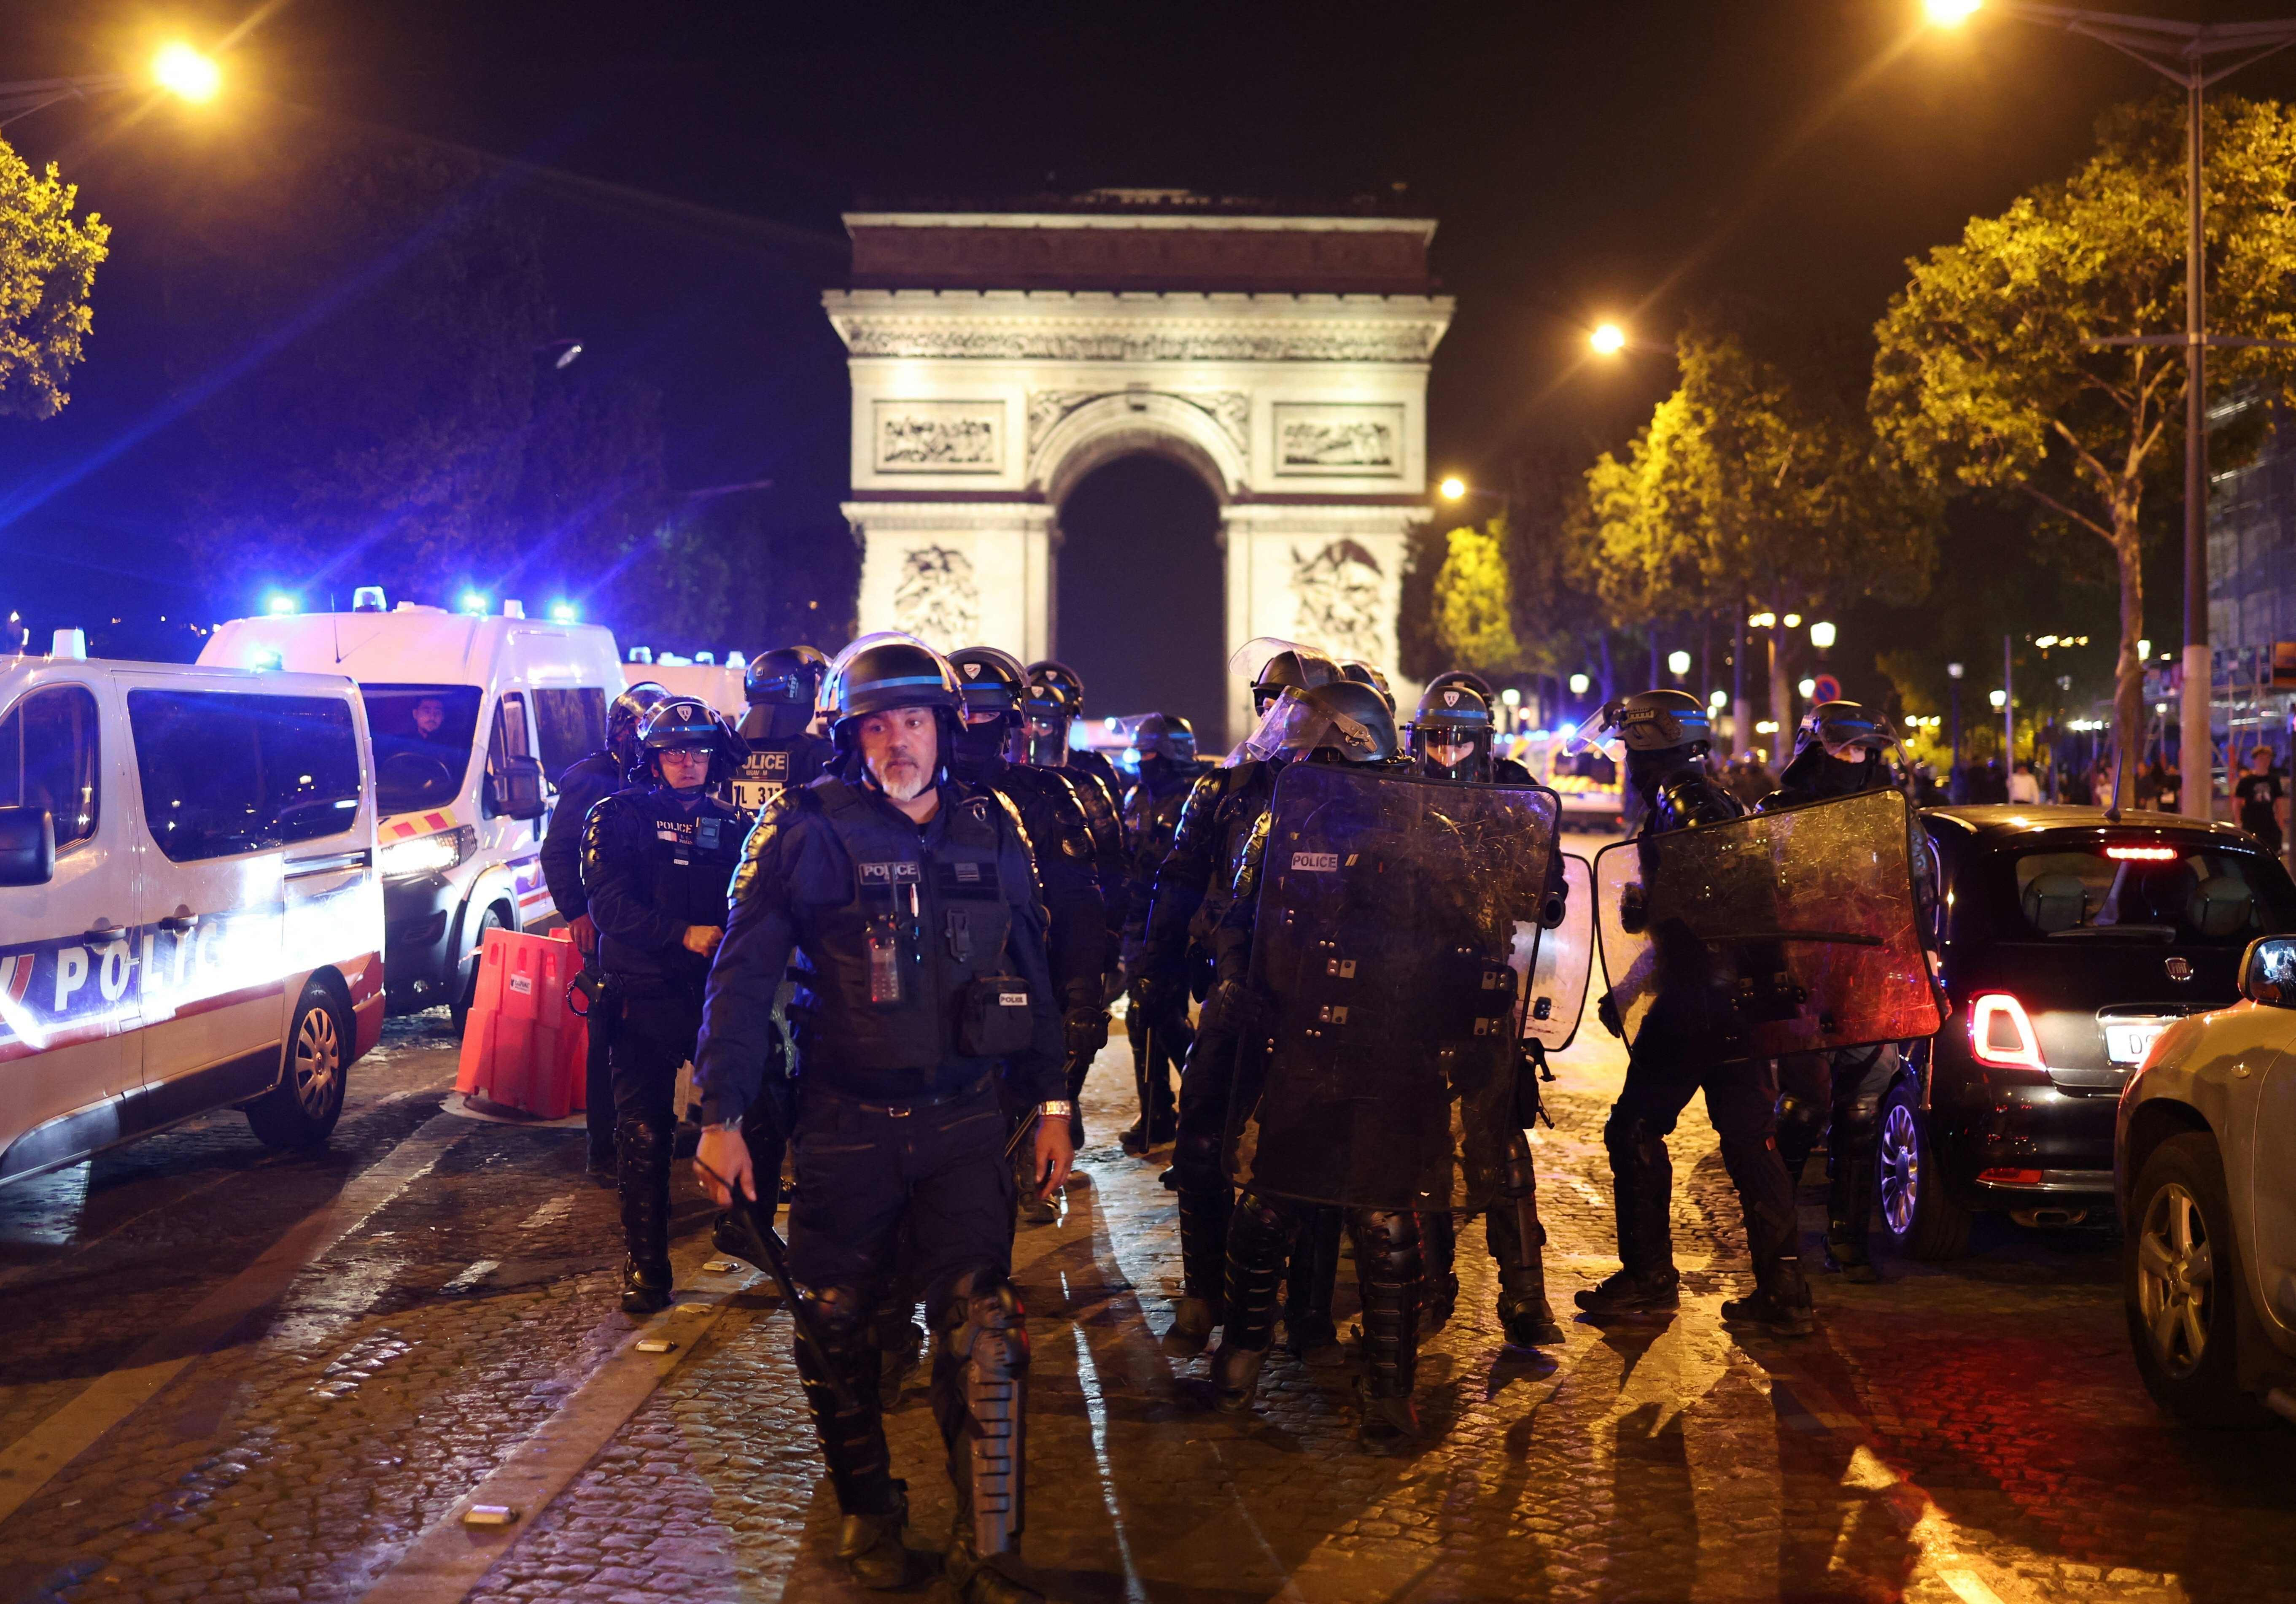 Nahel Merzouk police shooting Where are the riots in France? The Independent